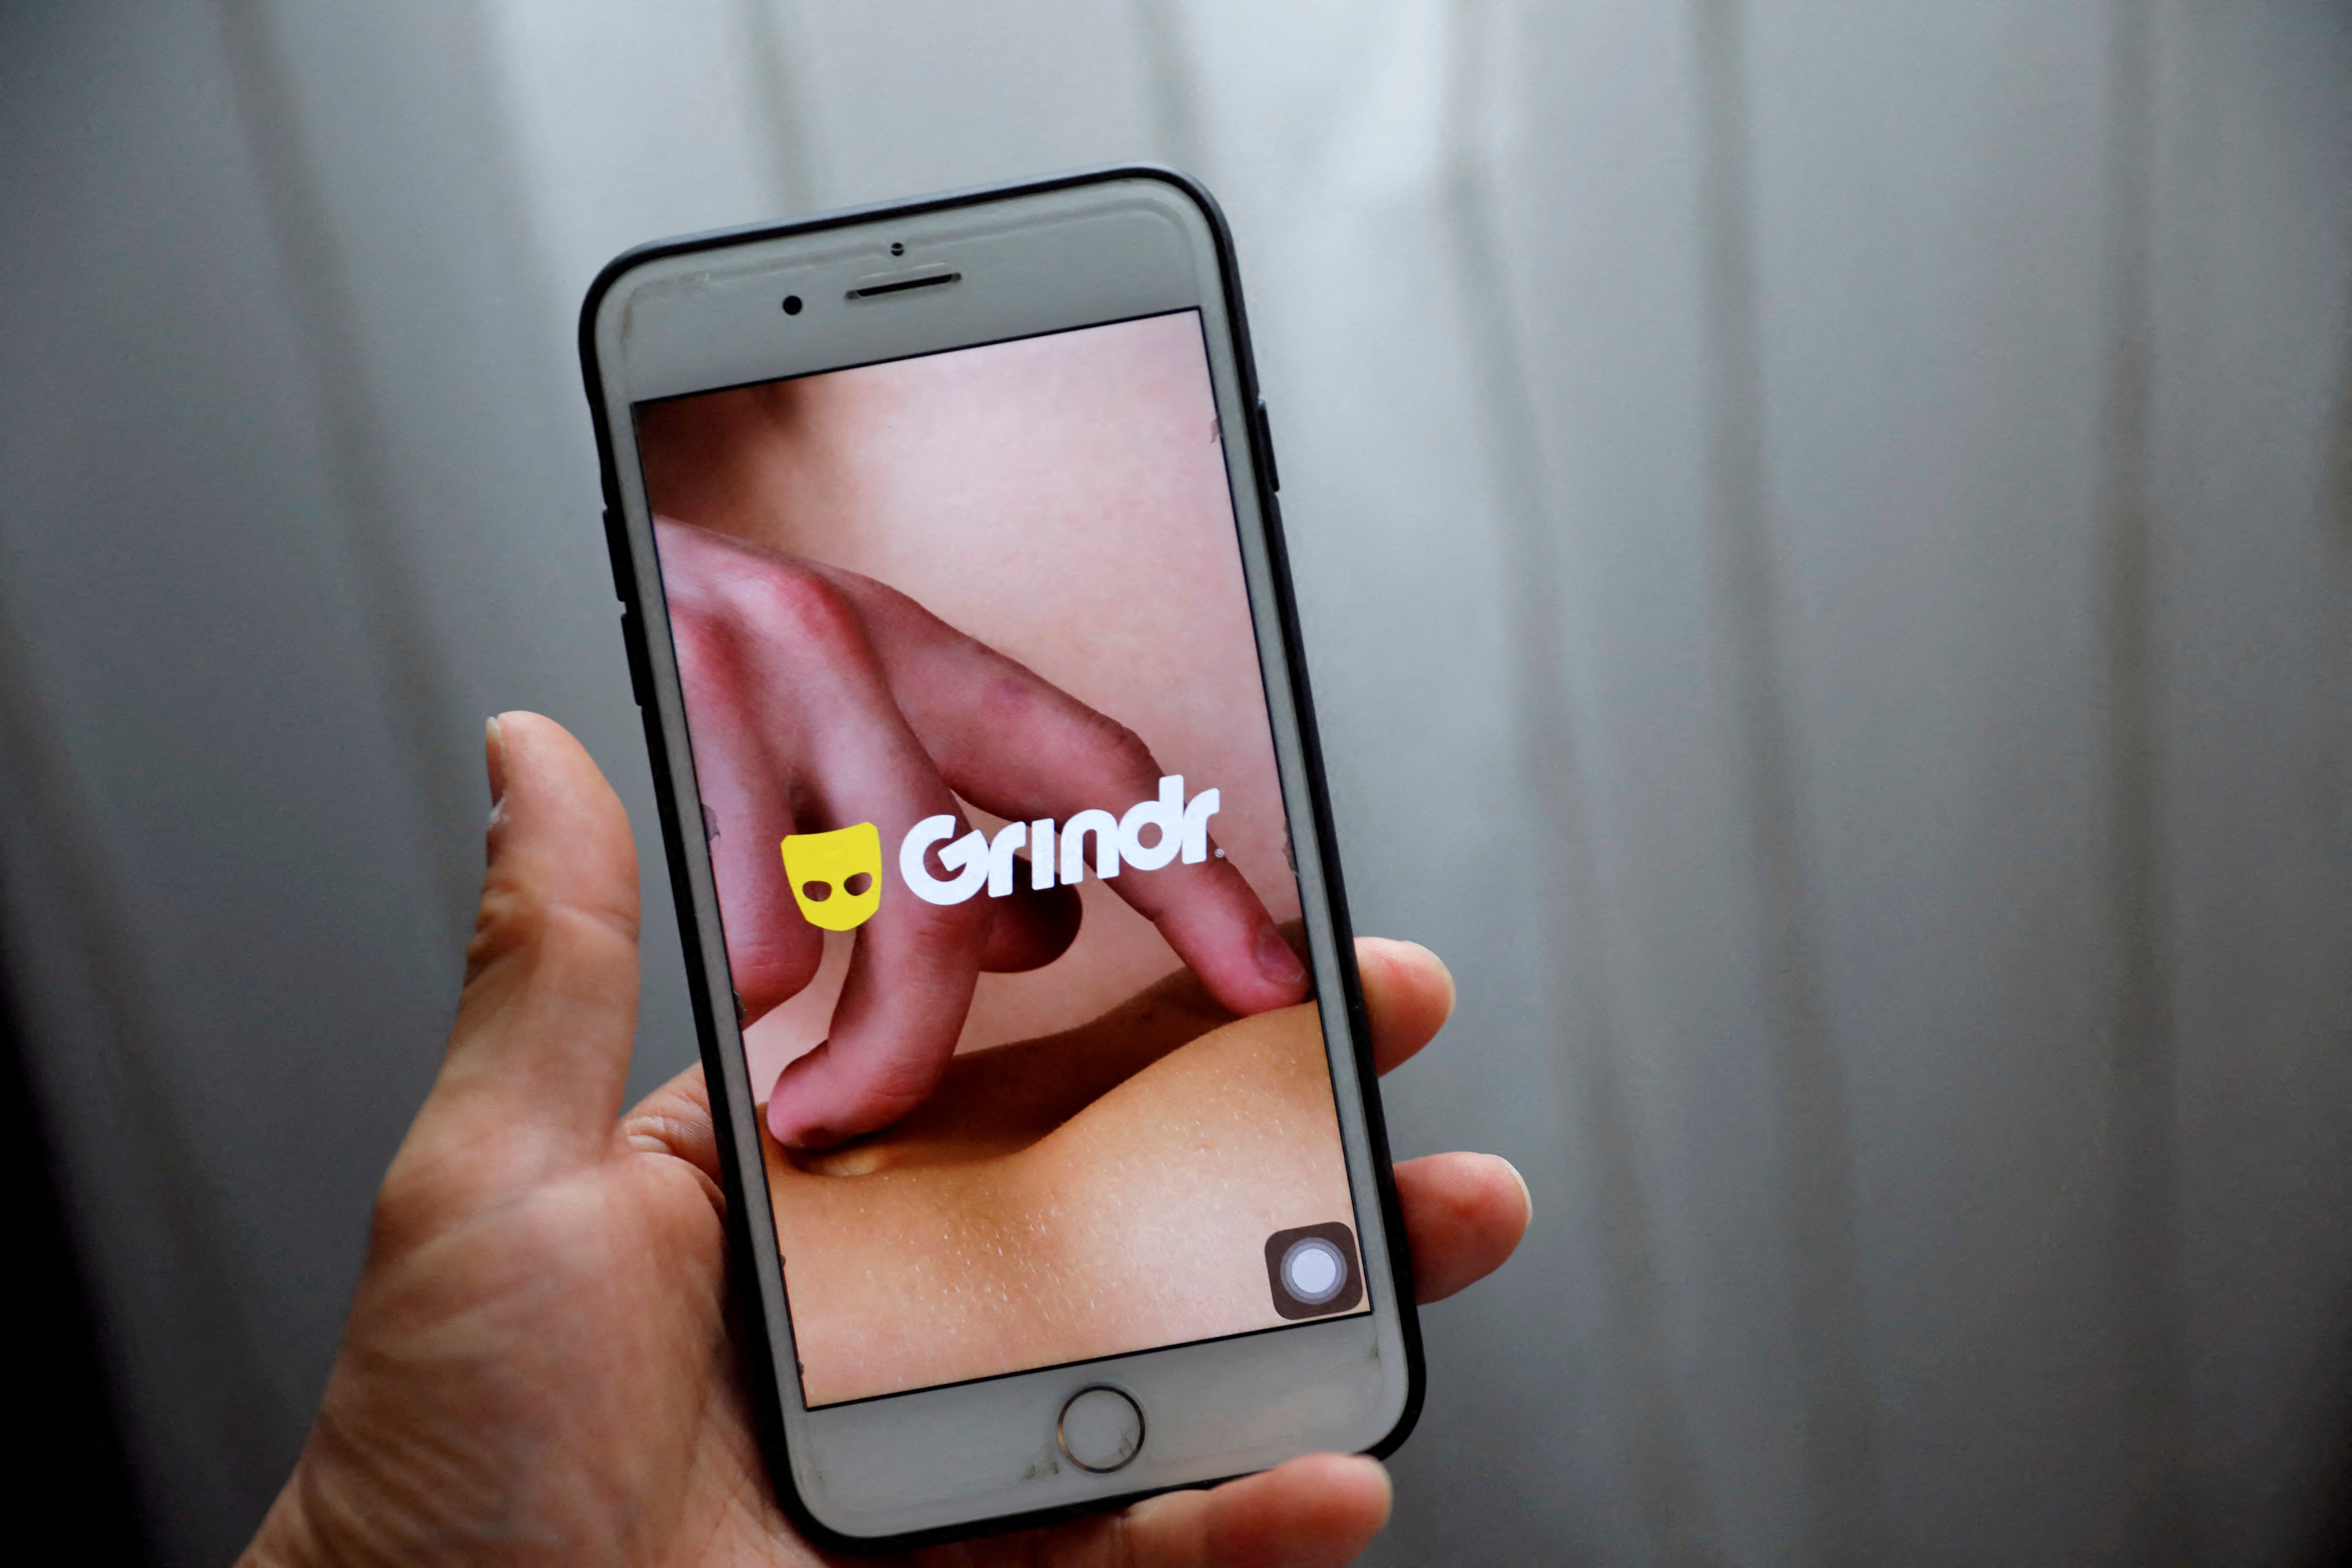 Grindr app is seen on a mobile phone in this photo illustration